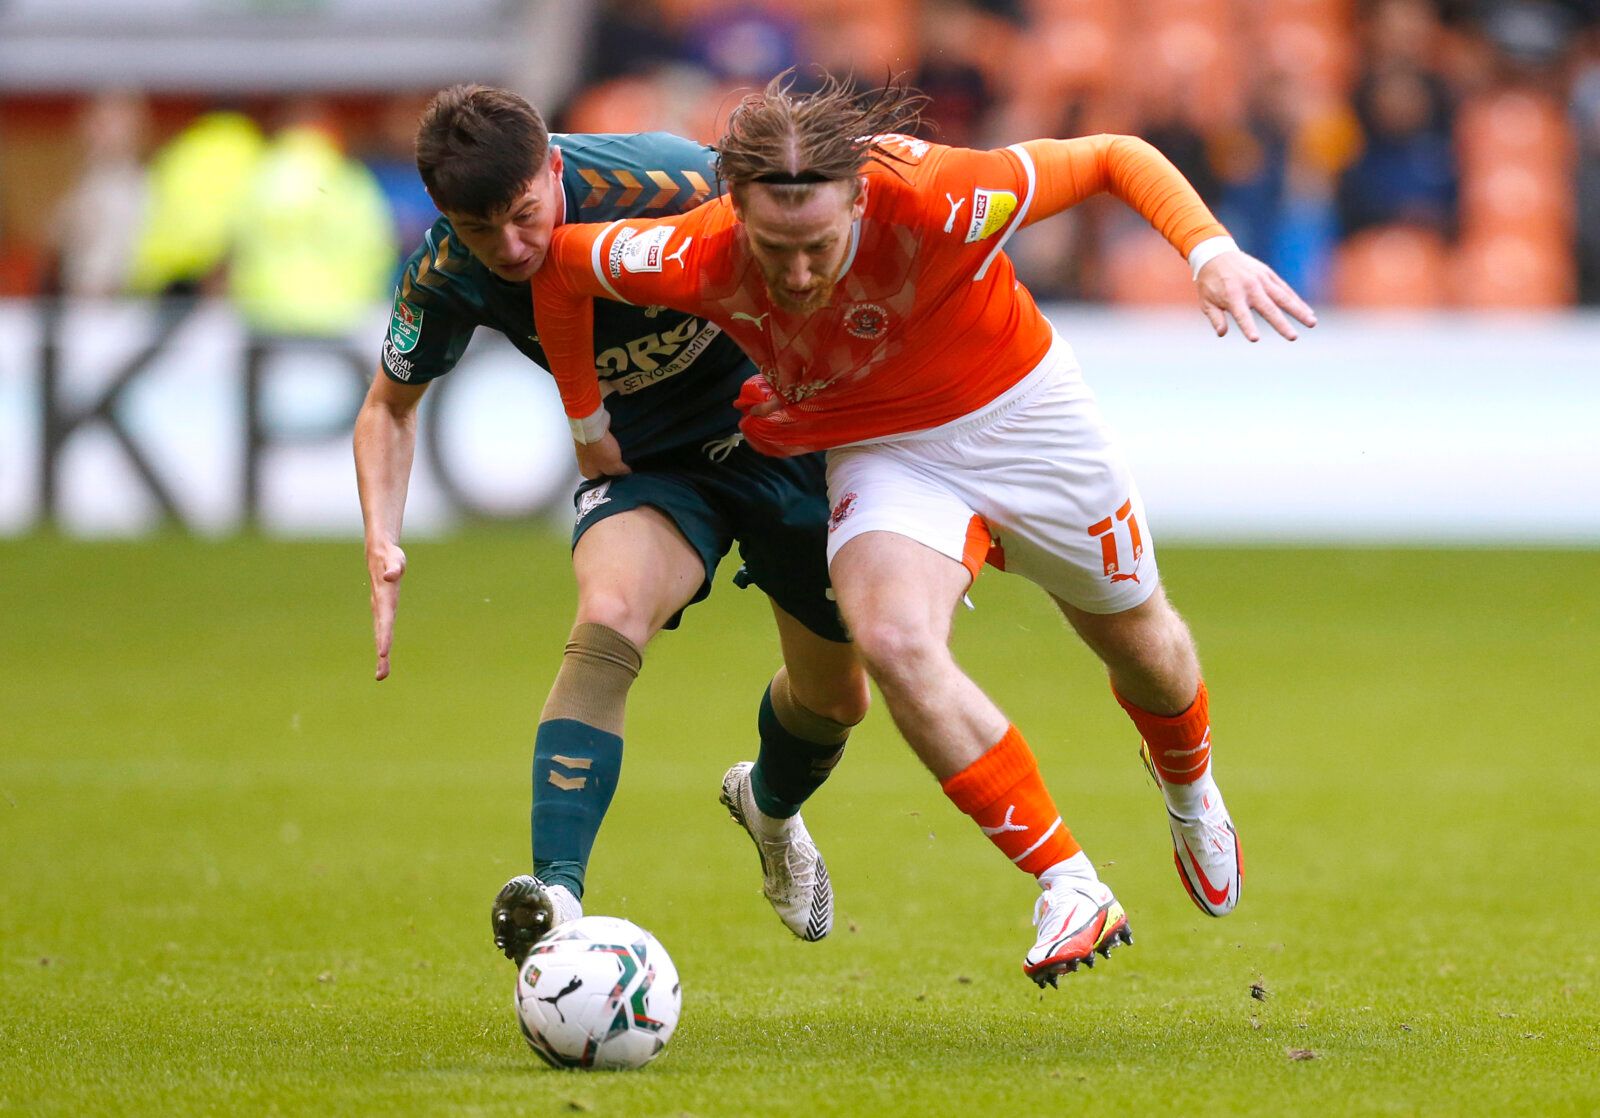 Soccer Football - Carabao Cup - First Round - Blackpool v Middlesbrough - Bloomfield Road, Blackpool, Britain - August 11, 2021  Middlesbrough's Jack Robinson in action with Blackpool's Josh Bowler Action Images/Ed Sykes EDITORIAL USE ONLY. No use with unauthorized audio, video, data, fixture lists, club/league logos or 'live' services. Online in-match use limited to 75 images, no video emulation. No use in betting, games or single club /league/player publications.  Please contact your account r